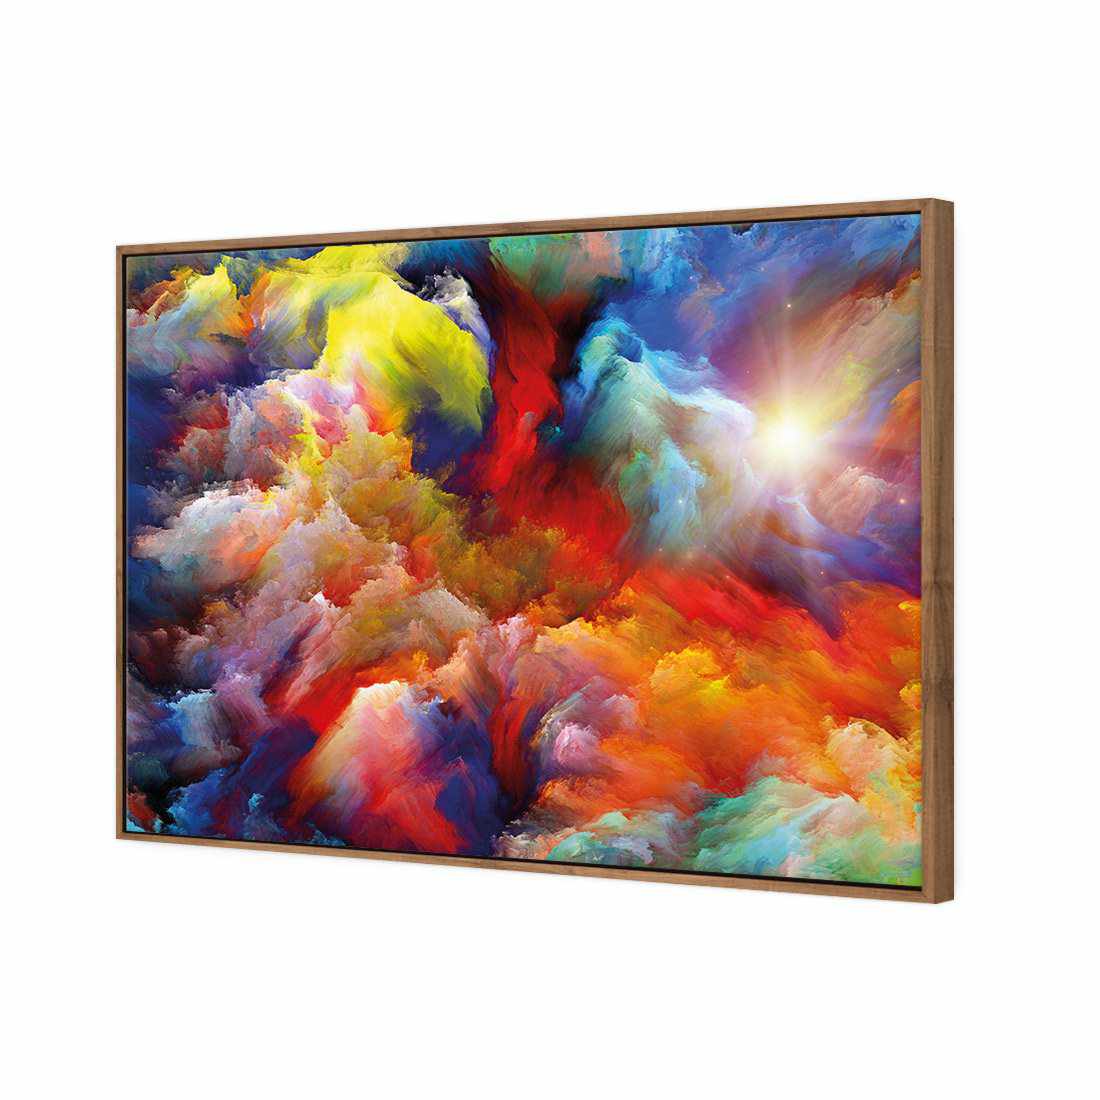 Clouds Of Colour Canvas Art-Canvas-Wall Art Designs-45x30cm-Canvas - Natural Frame-Wall Art Designs